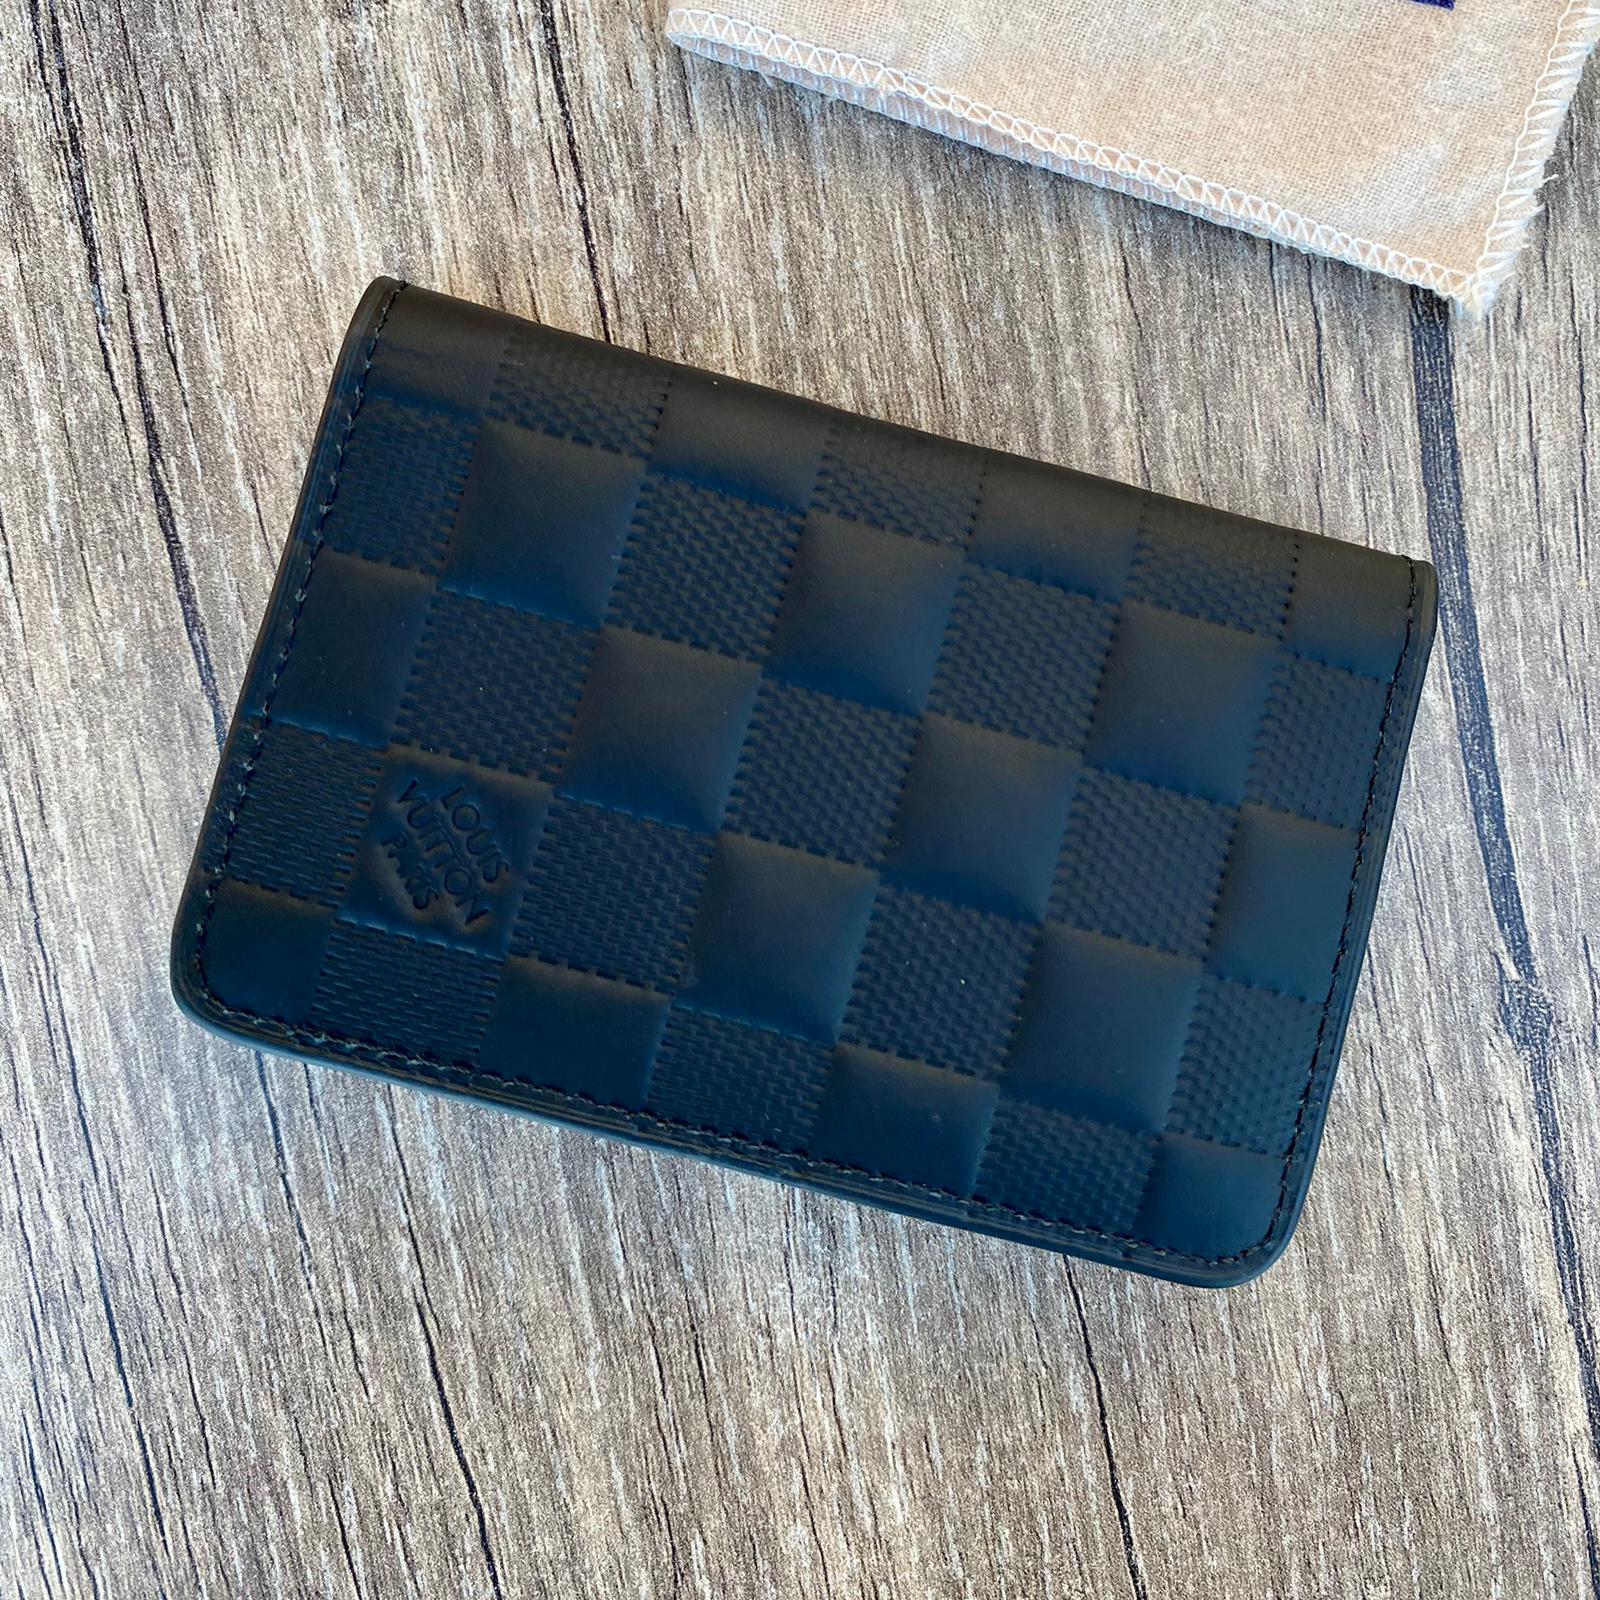 Louis Vuitton Black Leather Card Holder, Lv Business Card, Lv Fashion Leather Wallet